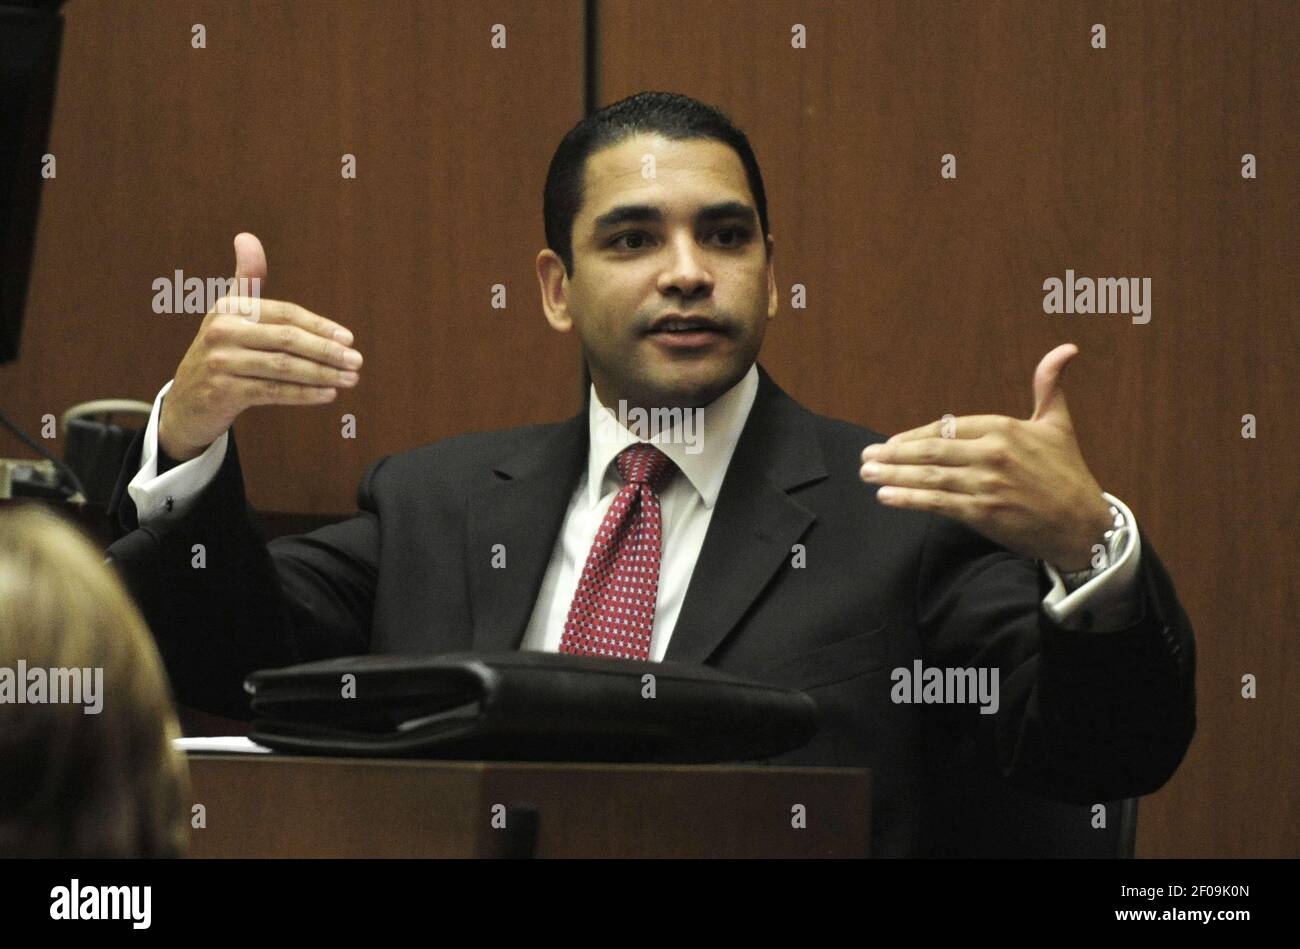 24 October 2011 - Los Angeles, California - Los Angeles Police Department Detective Orlando Martinez testifies as the defense starts its case during Dr. Conrad Murray involuntary manslaughter trial at Los Angeles Superior Court in Los Angeles, California USA, 24 October 2011. Murray has pleaded not guilty and faces four years in prison and the loss of his medical licenses if convicted of involuntary manslaughter in Michael Jackson's death. Photo Credit: Paul Buck/Pool/Sipa Press/murray twenty four.020/1110250009 Stock Photo